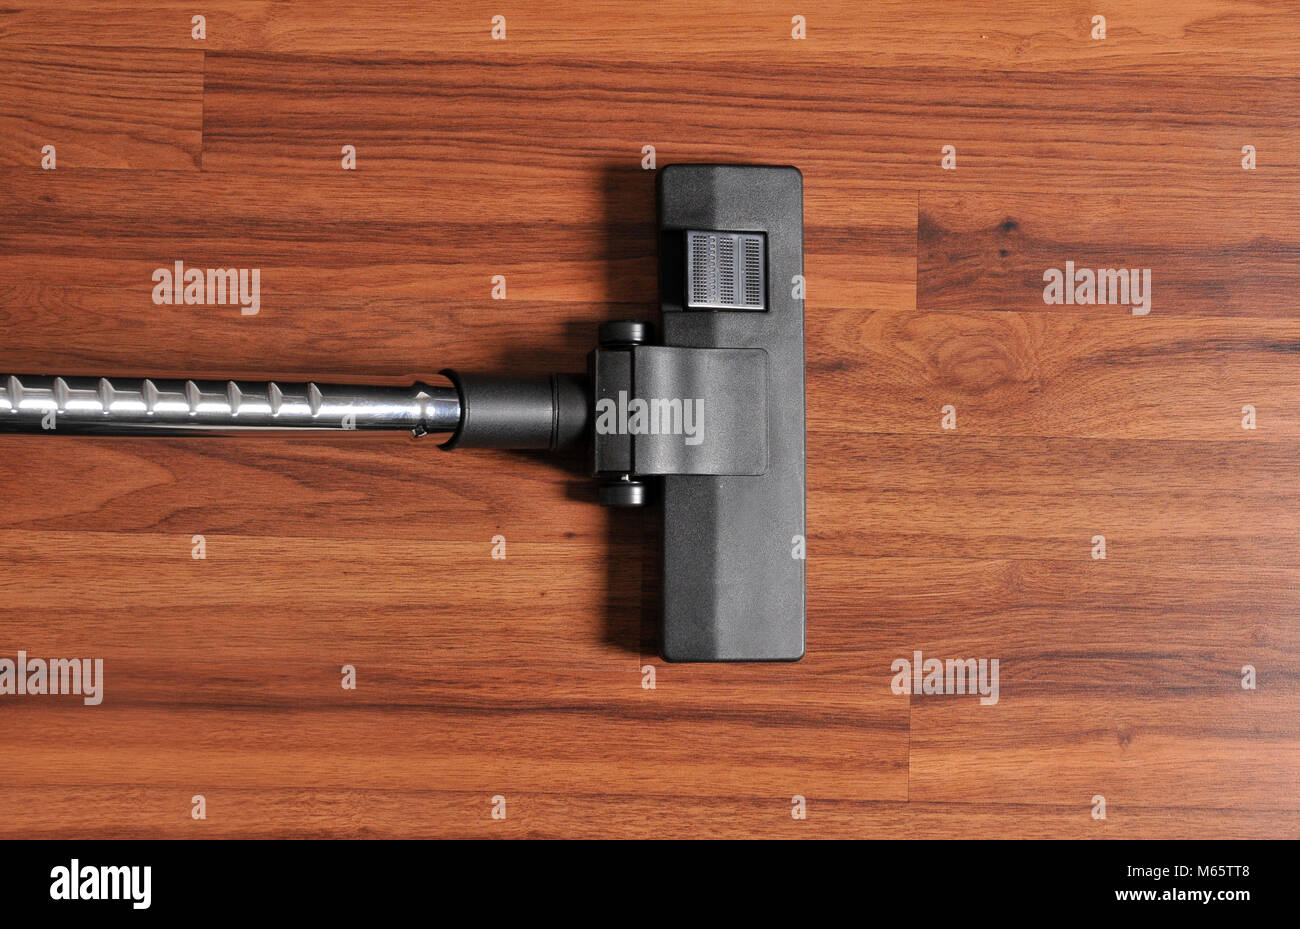 Vacuum cleaner for wood floor, house cleaning Stock Photo